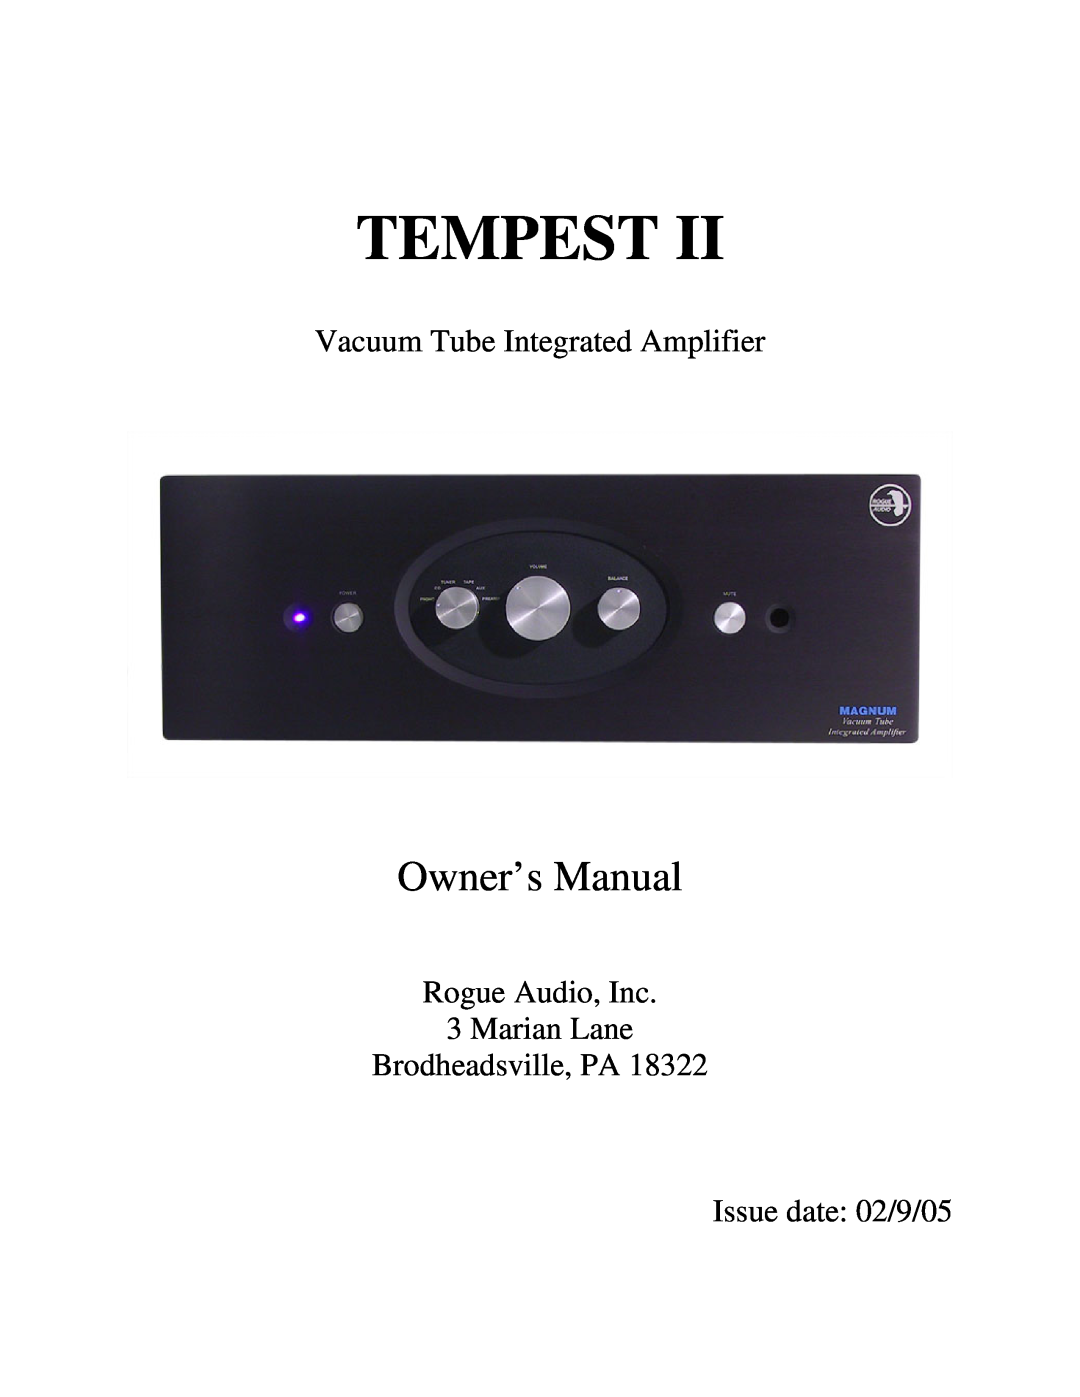 Rogue Audio TEMPEST II owner manual Tempest, Vacuum Tube Integrated Amplifier, Issue date 02/9/05 